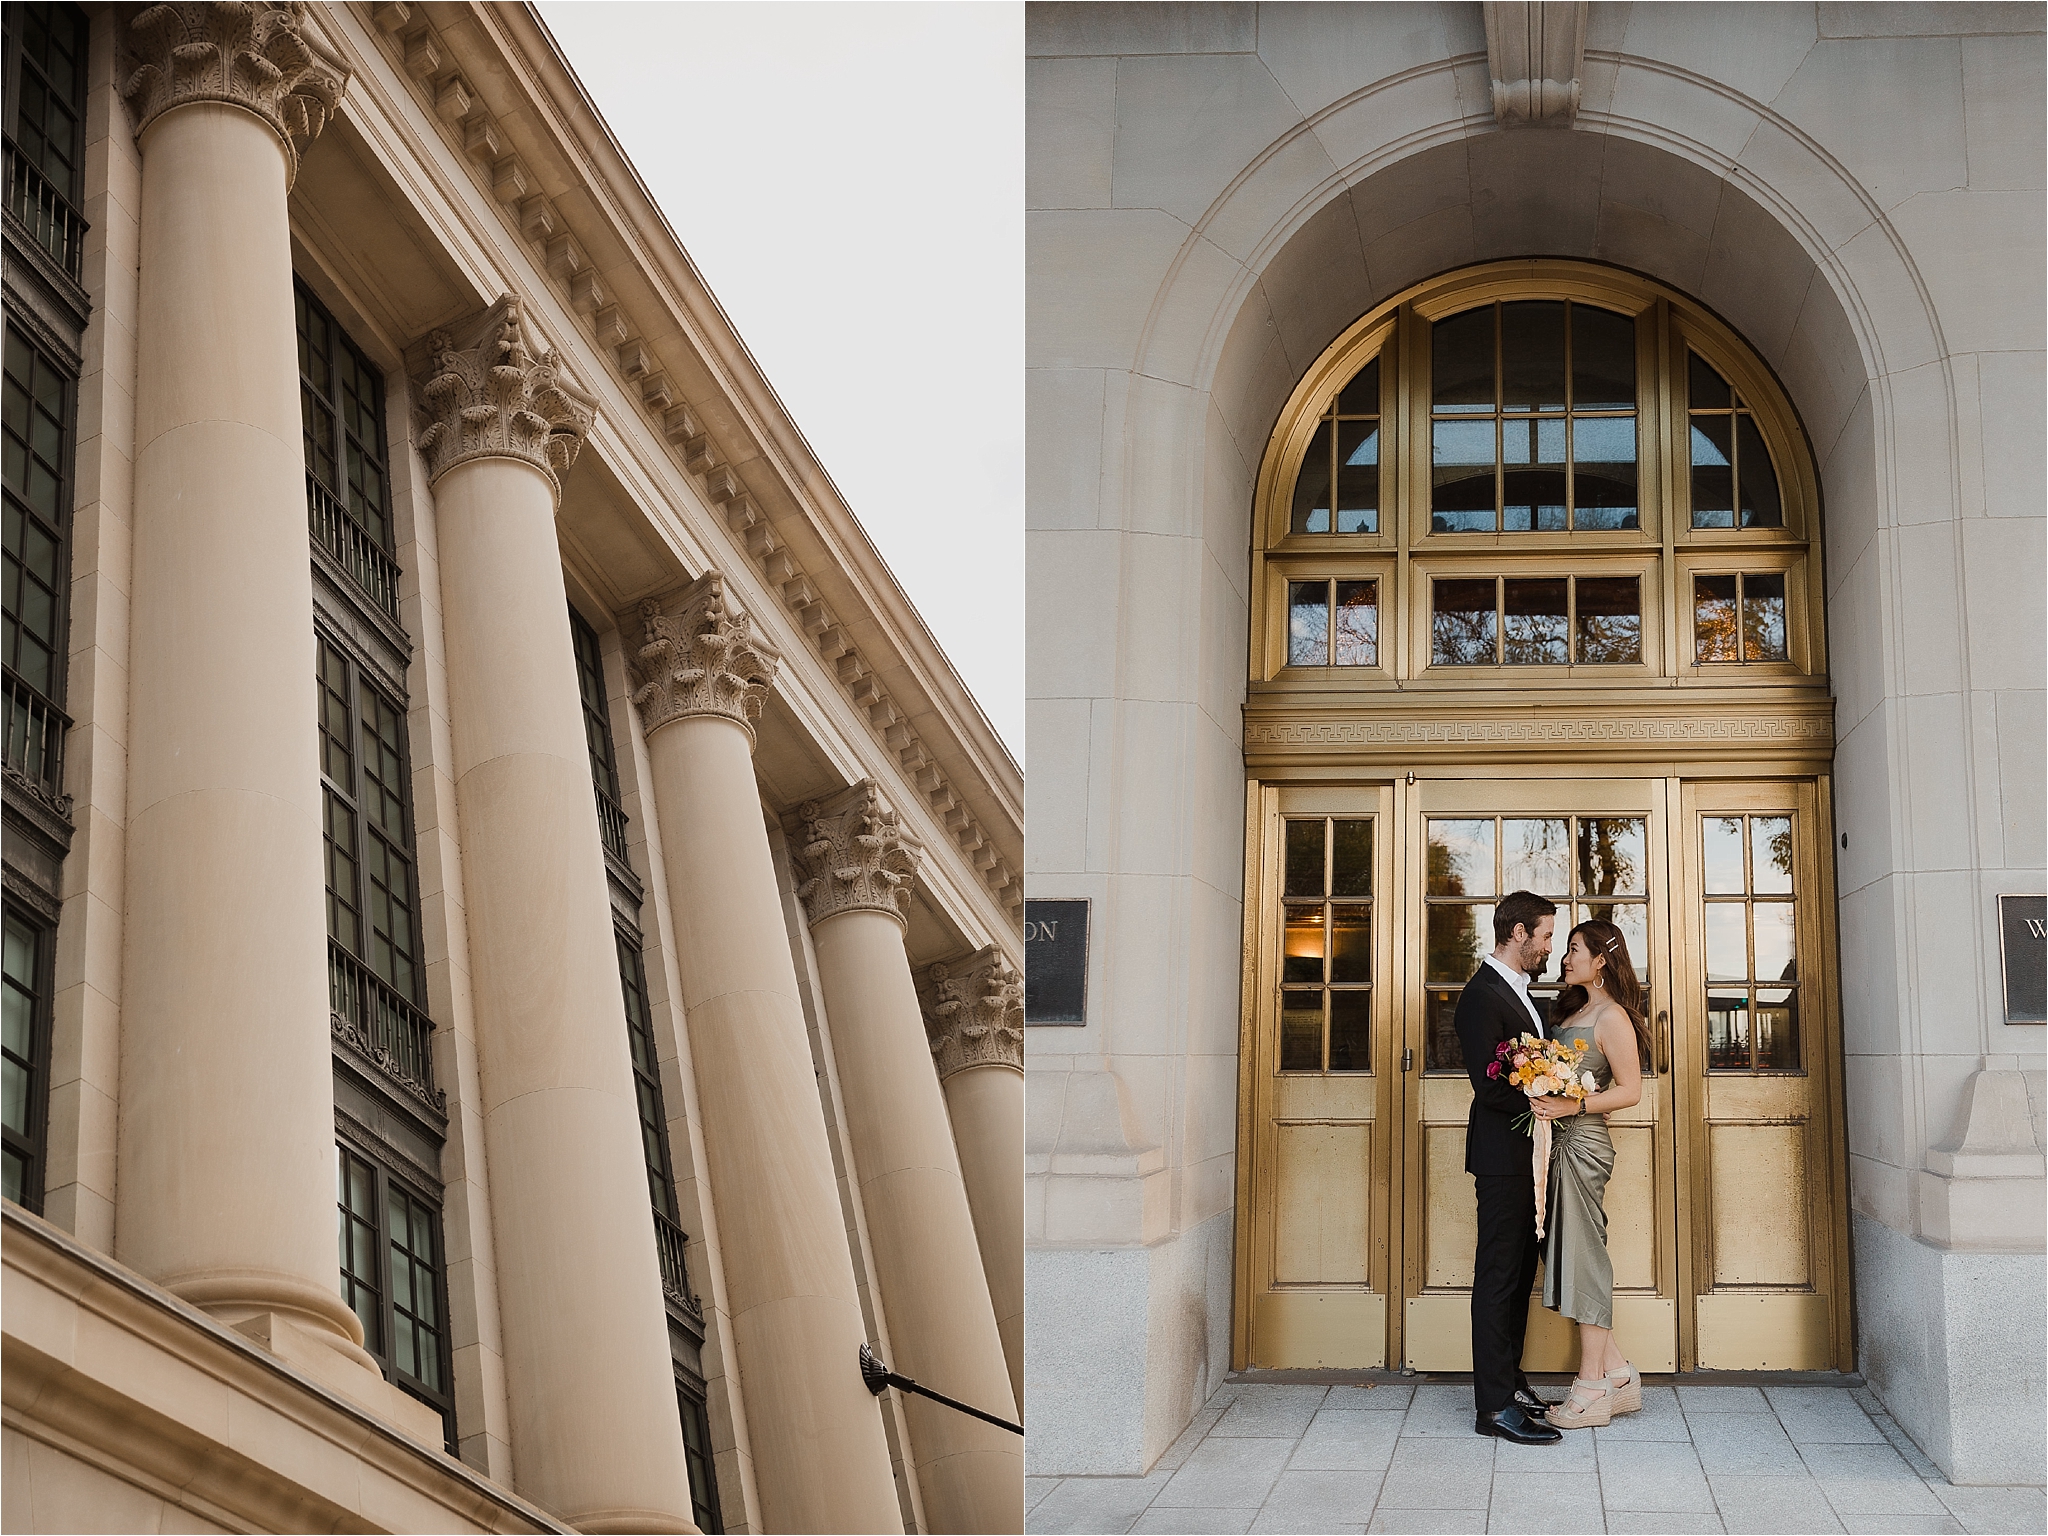 Downtown Ottawa elopement photo shoot ombre bouquet, Wellington building, photography by Sonia V Photography